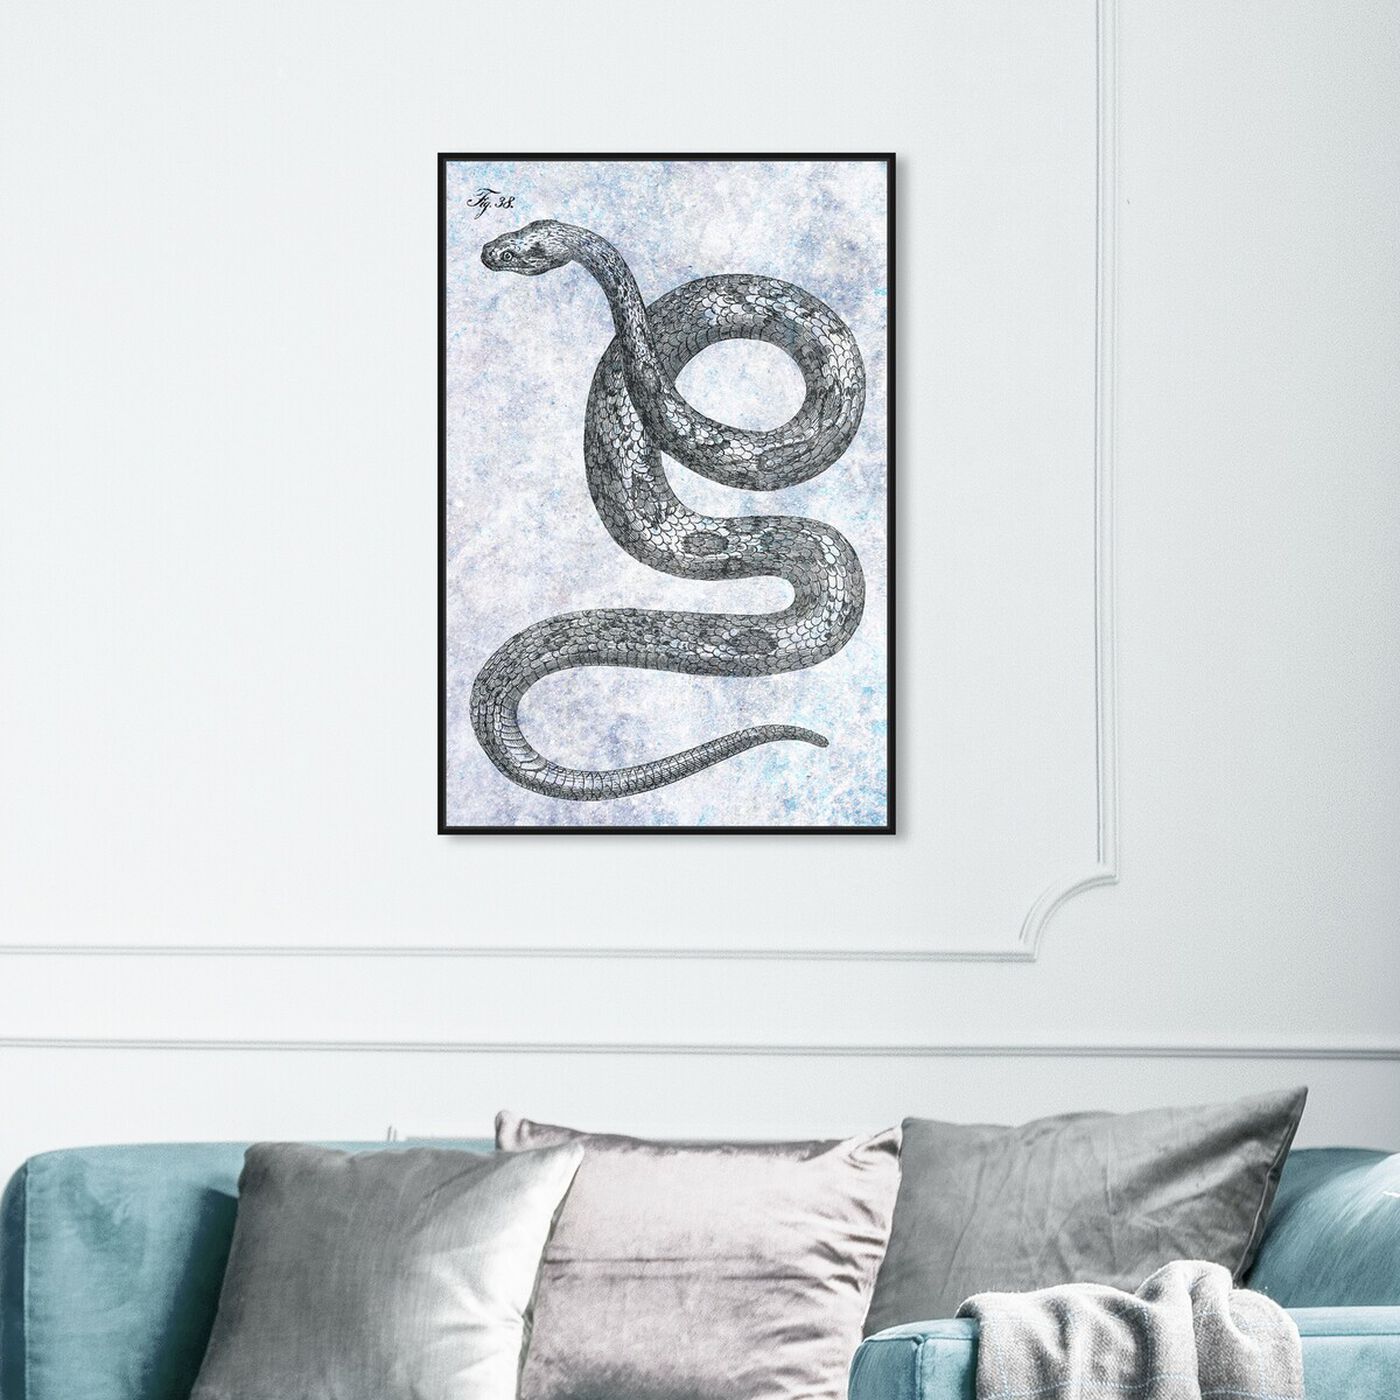 Hanging view of Single Snake featuring animals and zoo and wild animals art.